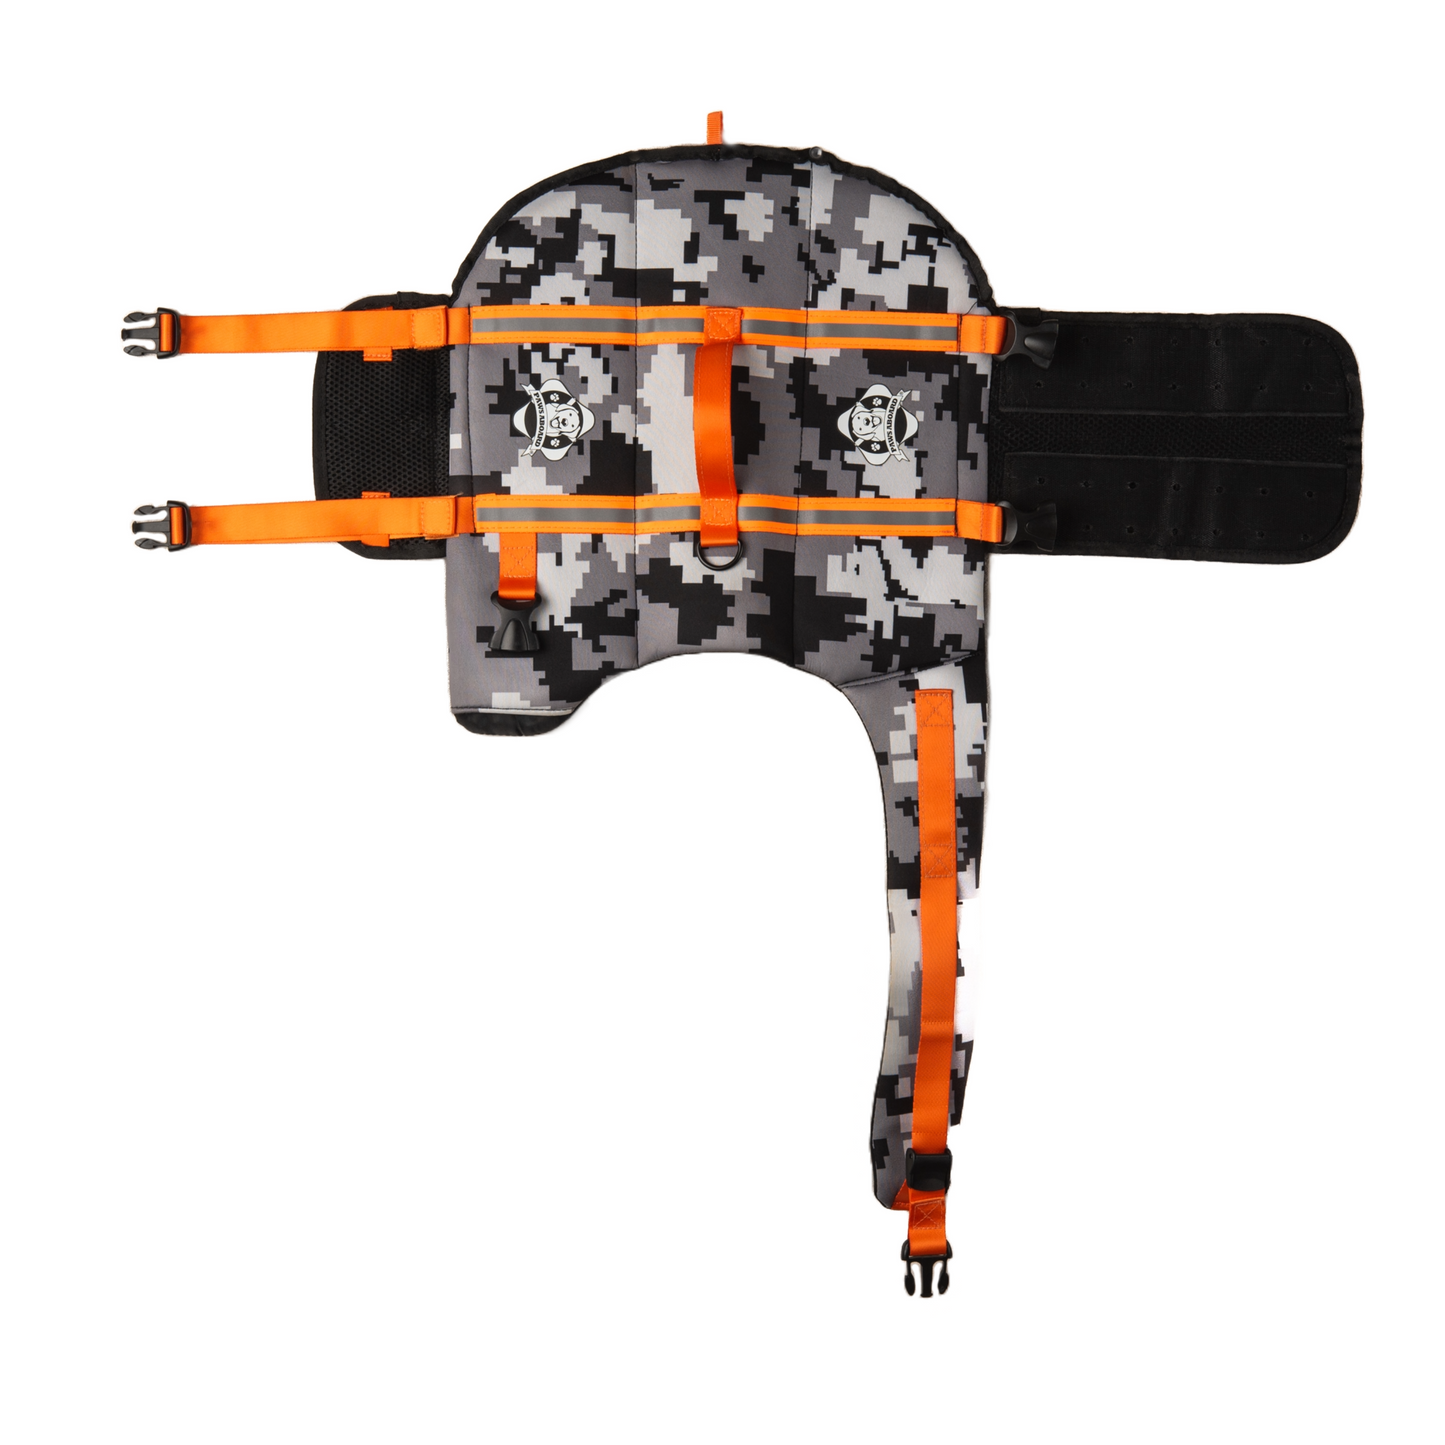 Black and grey digital camouflage dog life jacket with fluorescent orange reflective straps and top rescue handle. Paws Aboard logo on side of neoprene jacket centered between the straps.